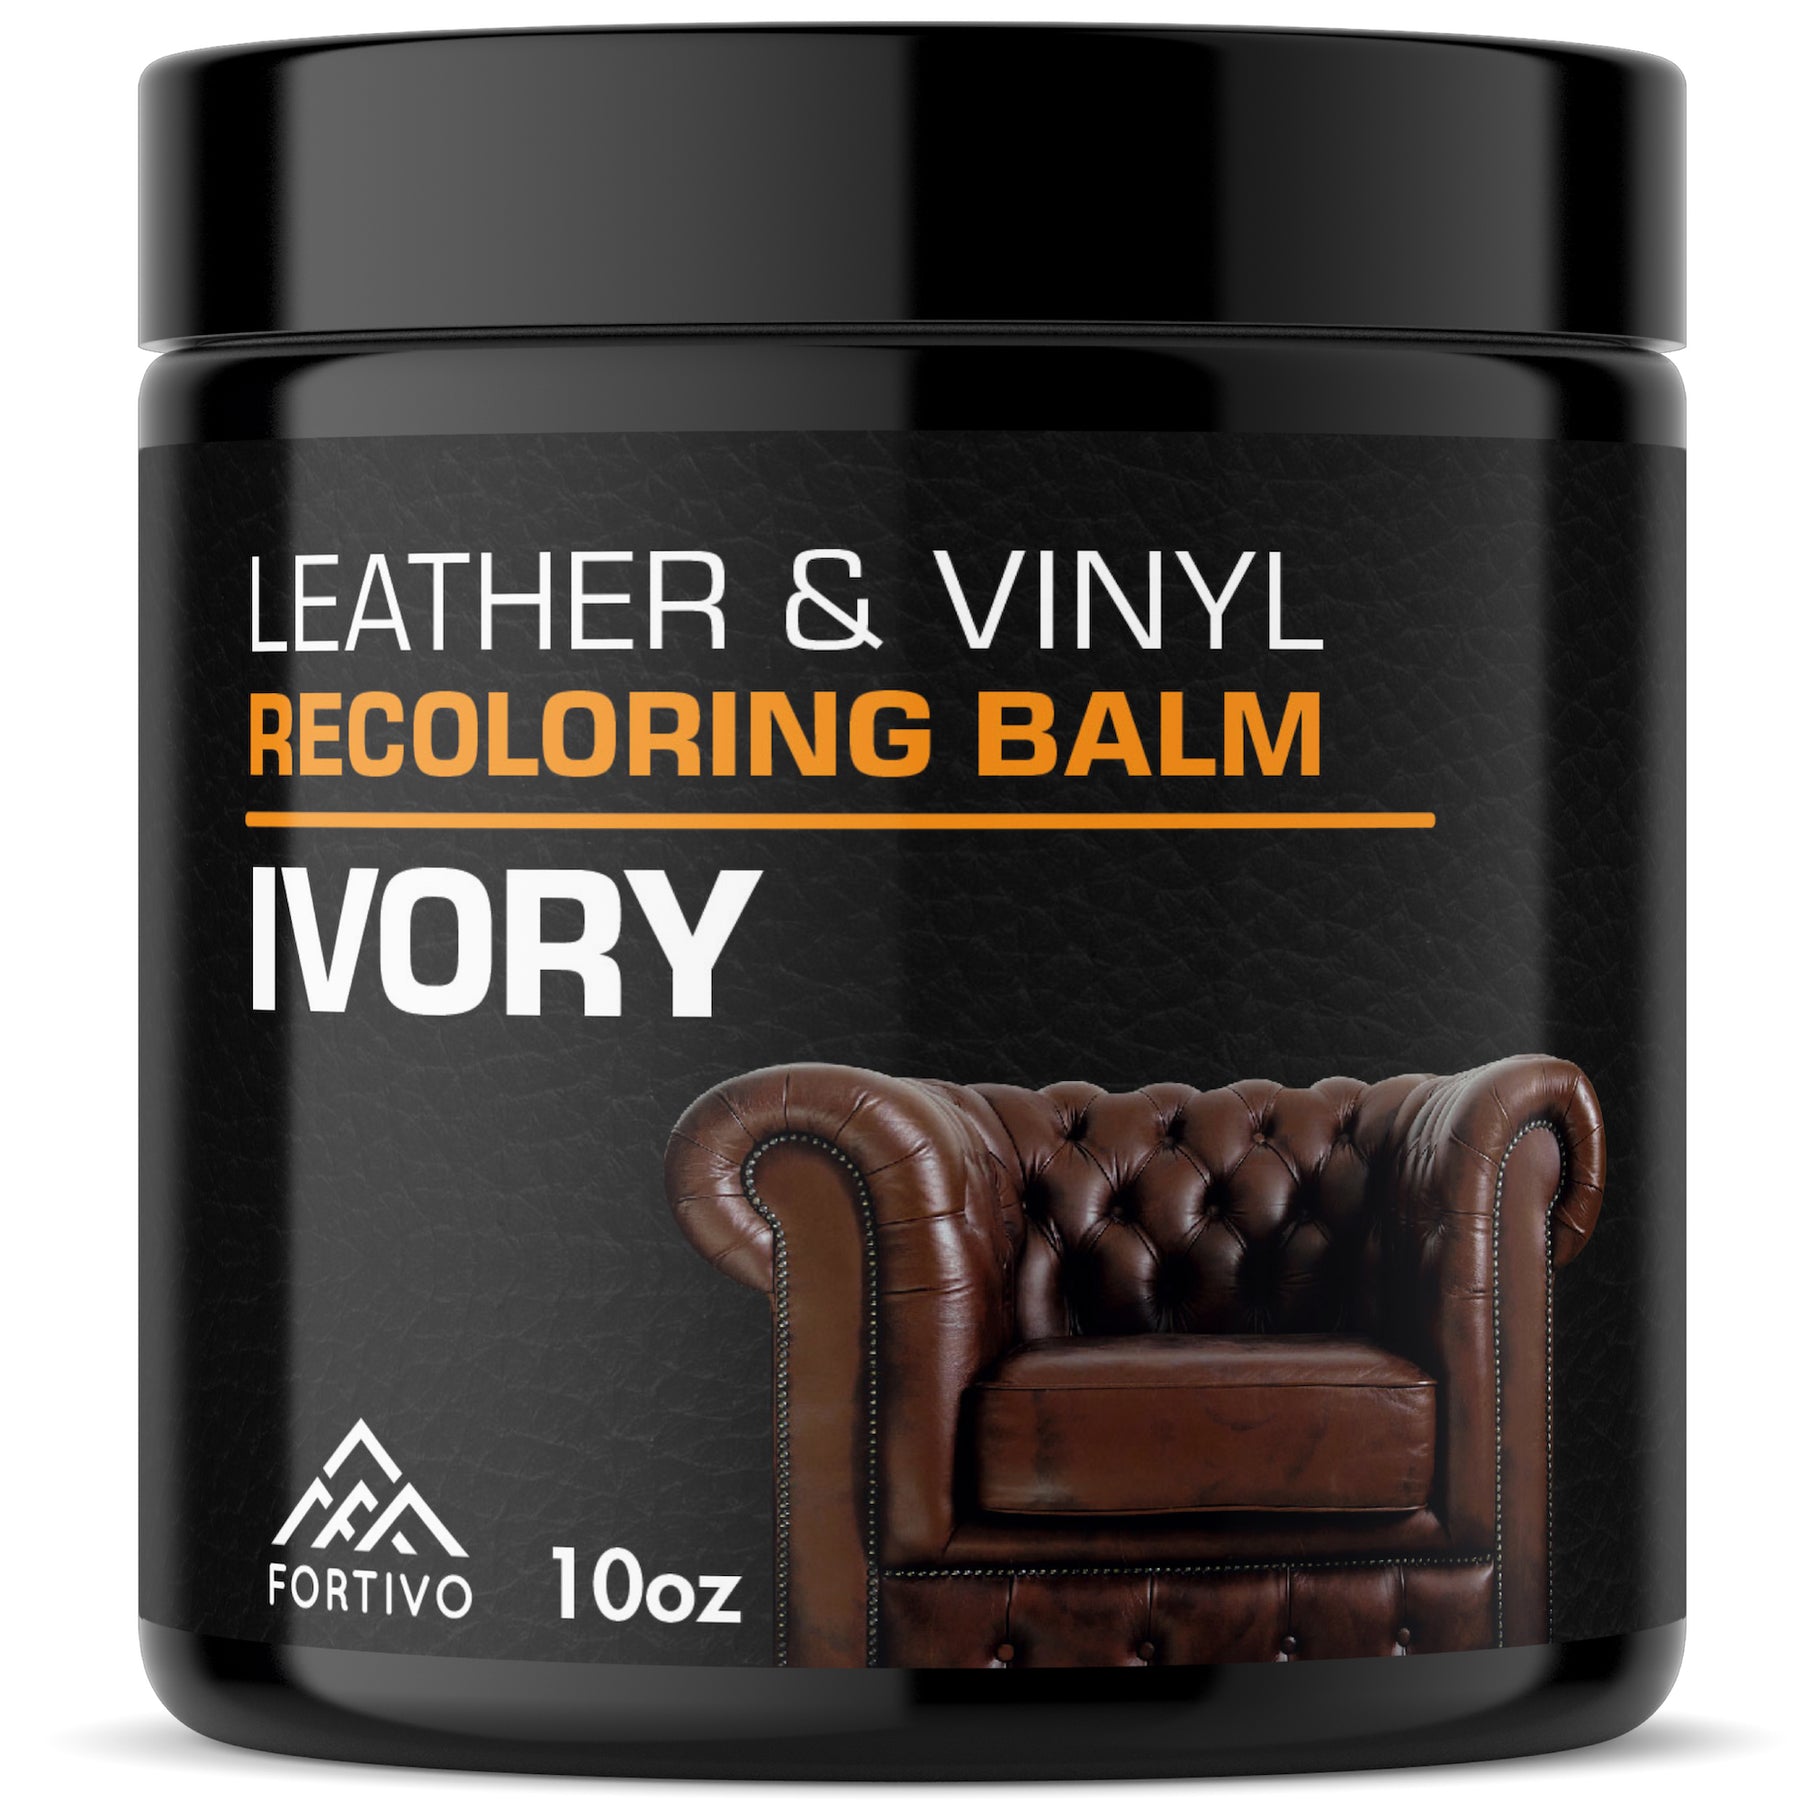 Leather Cleaning, Repair & Restoration Fmy, FL